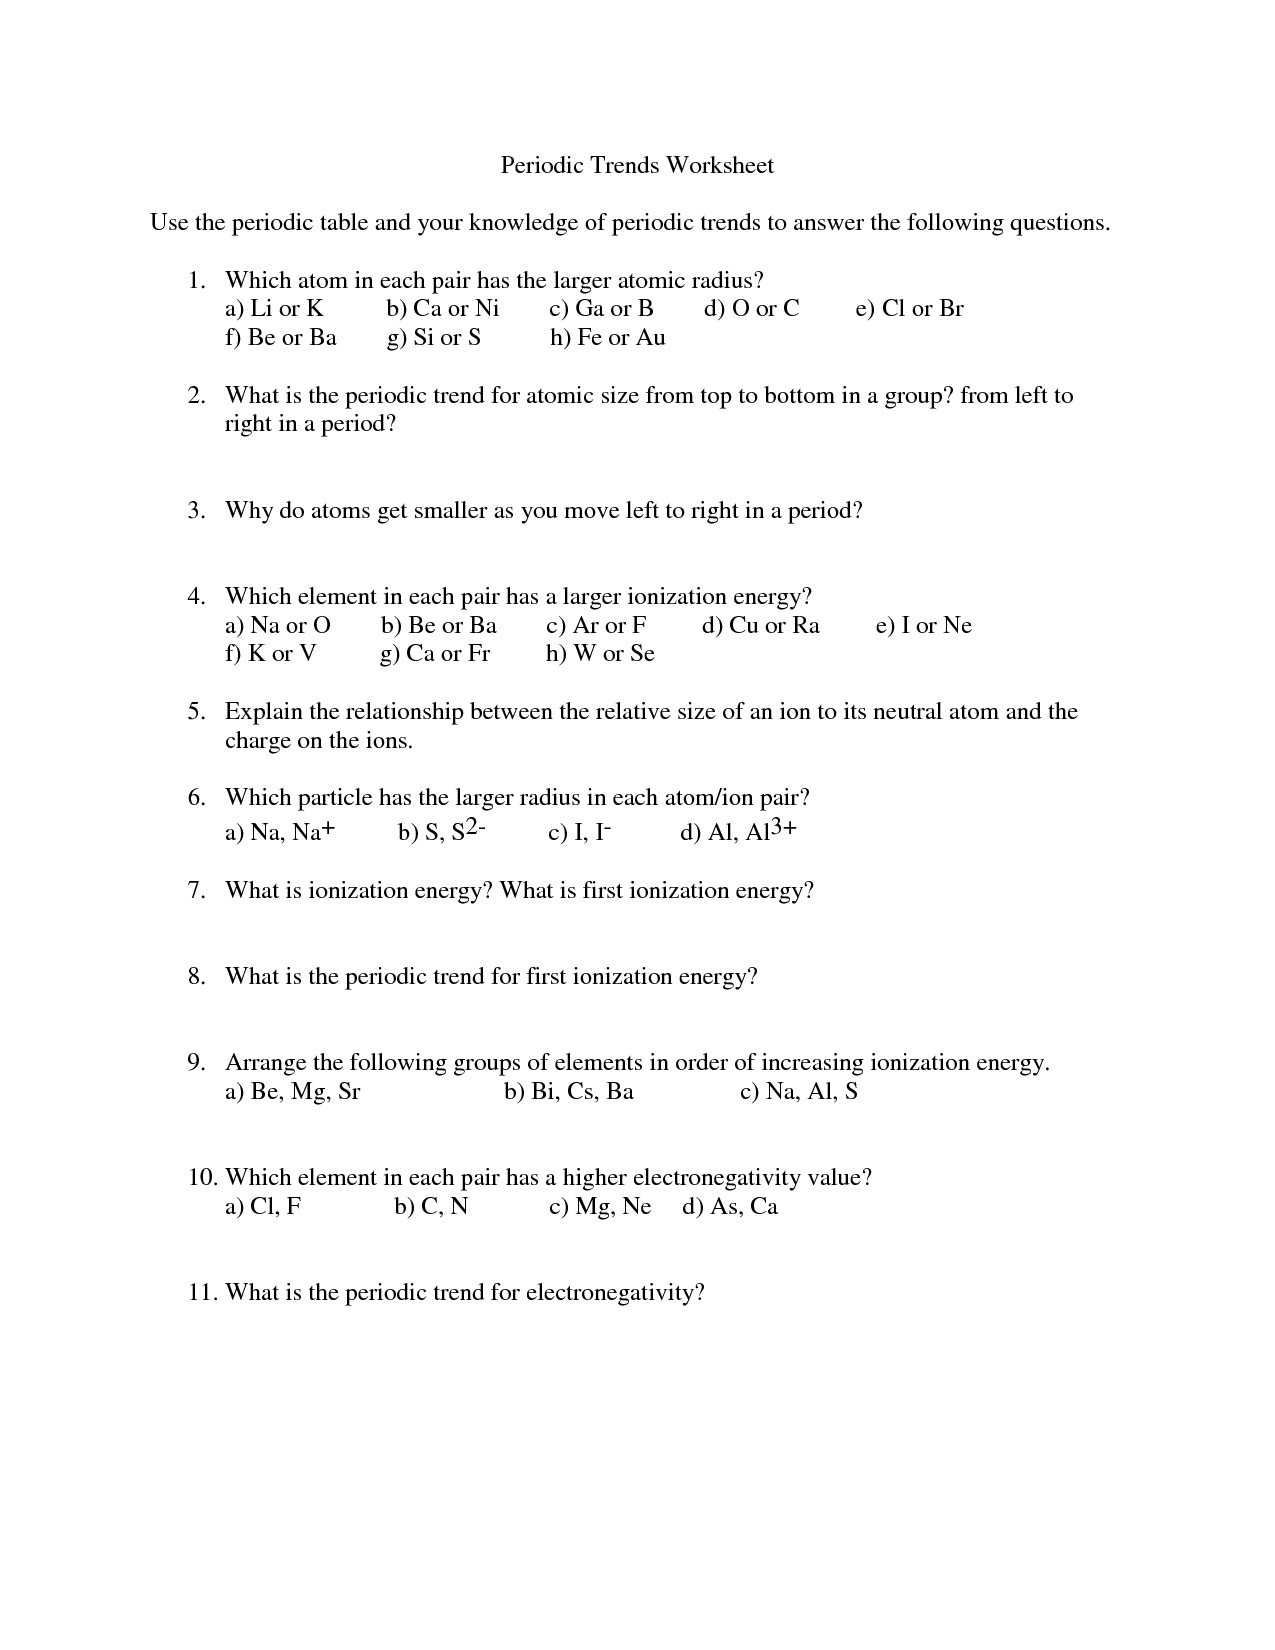 Chemistry Nomenclature Worksheet Answers with Periodic Trends Worksheet Answers 6 3 Kidz Activities